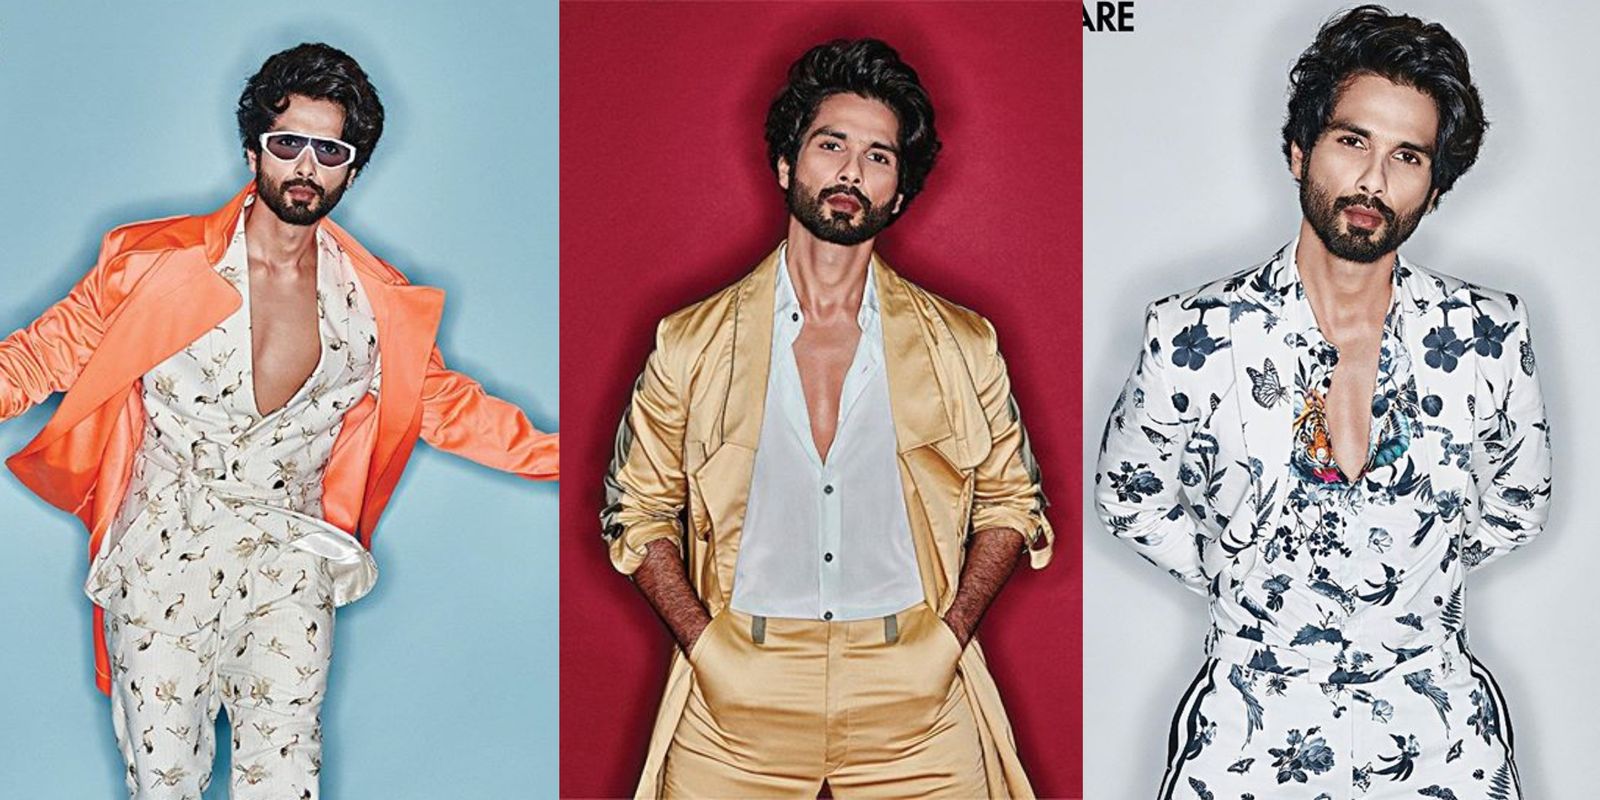 Shahid Kapoor Goes Quirky For This Magazine Cover Photoshoot! See Pictures...